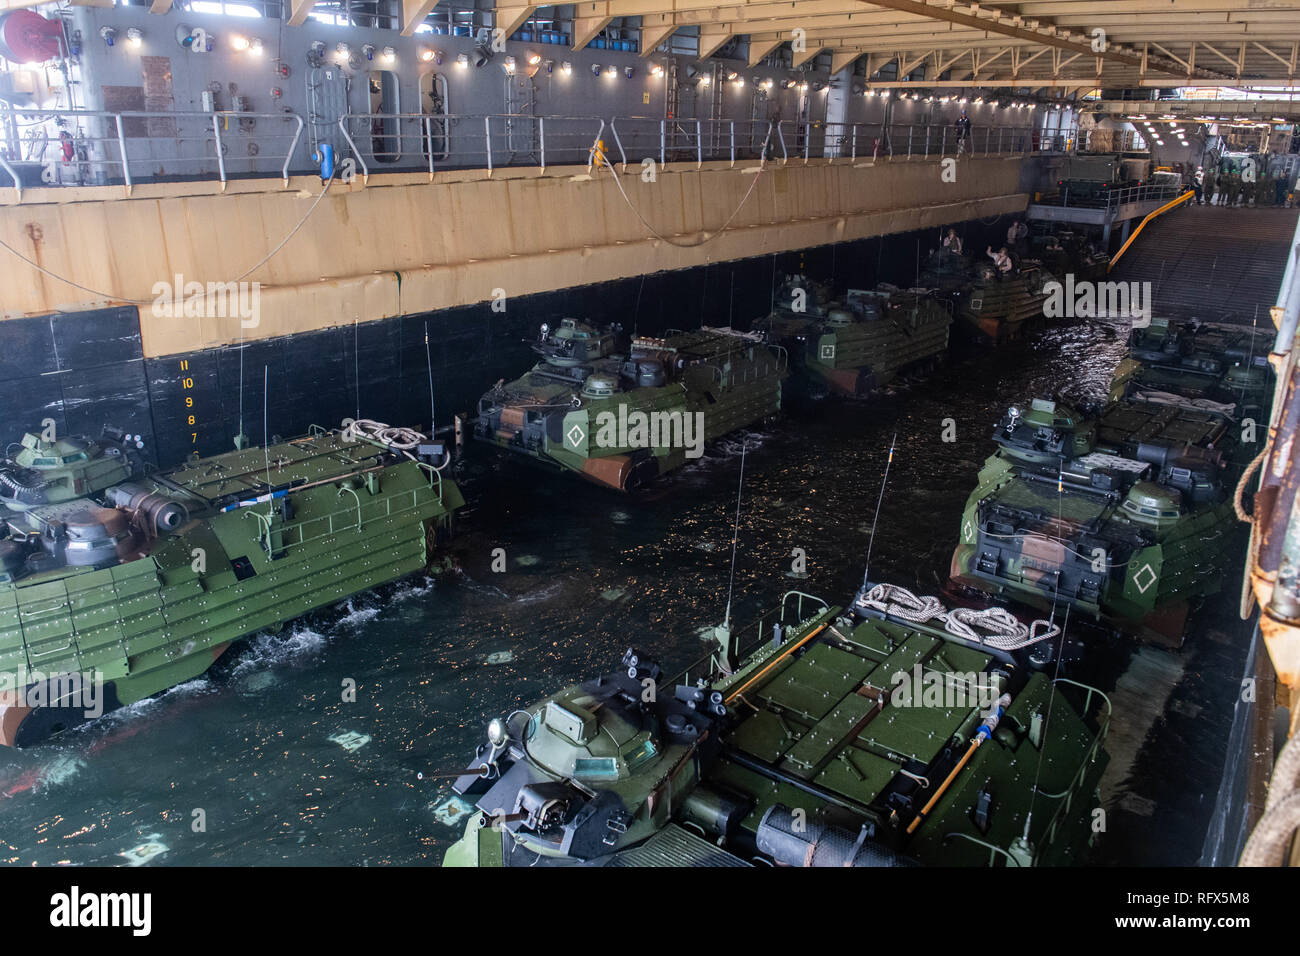 190116-N-HD110-0057  PACIFIC OCEAN (Jan. 16, 2019) Assault amphibious vehicles attached to Battalion Landing Team 3rd Battalion, 5th Marine Regiment, 11th Marine Expeditionary Unit standby to exit the well deck of the Harpers Ferry-class amphibious dock landing ship USS Harpers Ferry (LSD 49) during a training exercise. Harpers Ferry is underway conducting routine operations as a part of USS Boxer Amphibious Ready Group (ARG) in the eastern Pacific Ocean. (U.S. Navy photo by Mass Communication Specialist 3rd Class Danielle A. Baker) Stock Photo